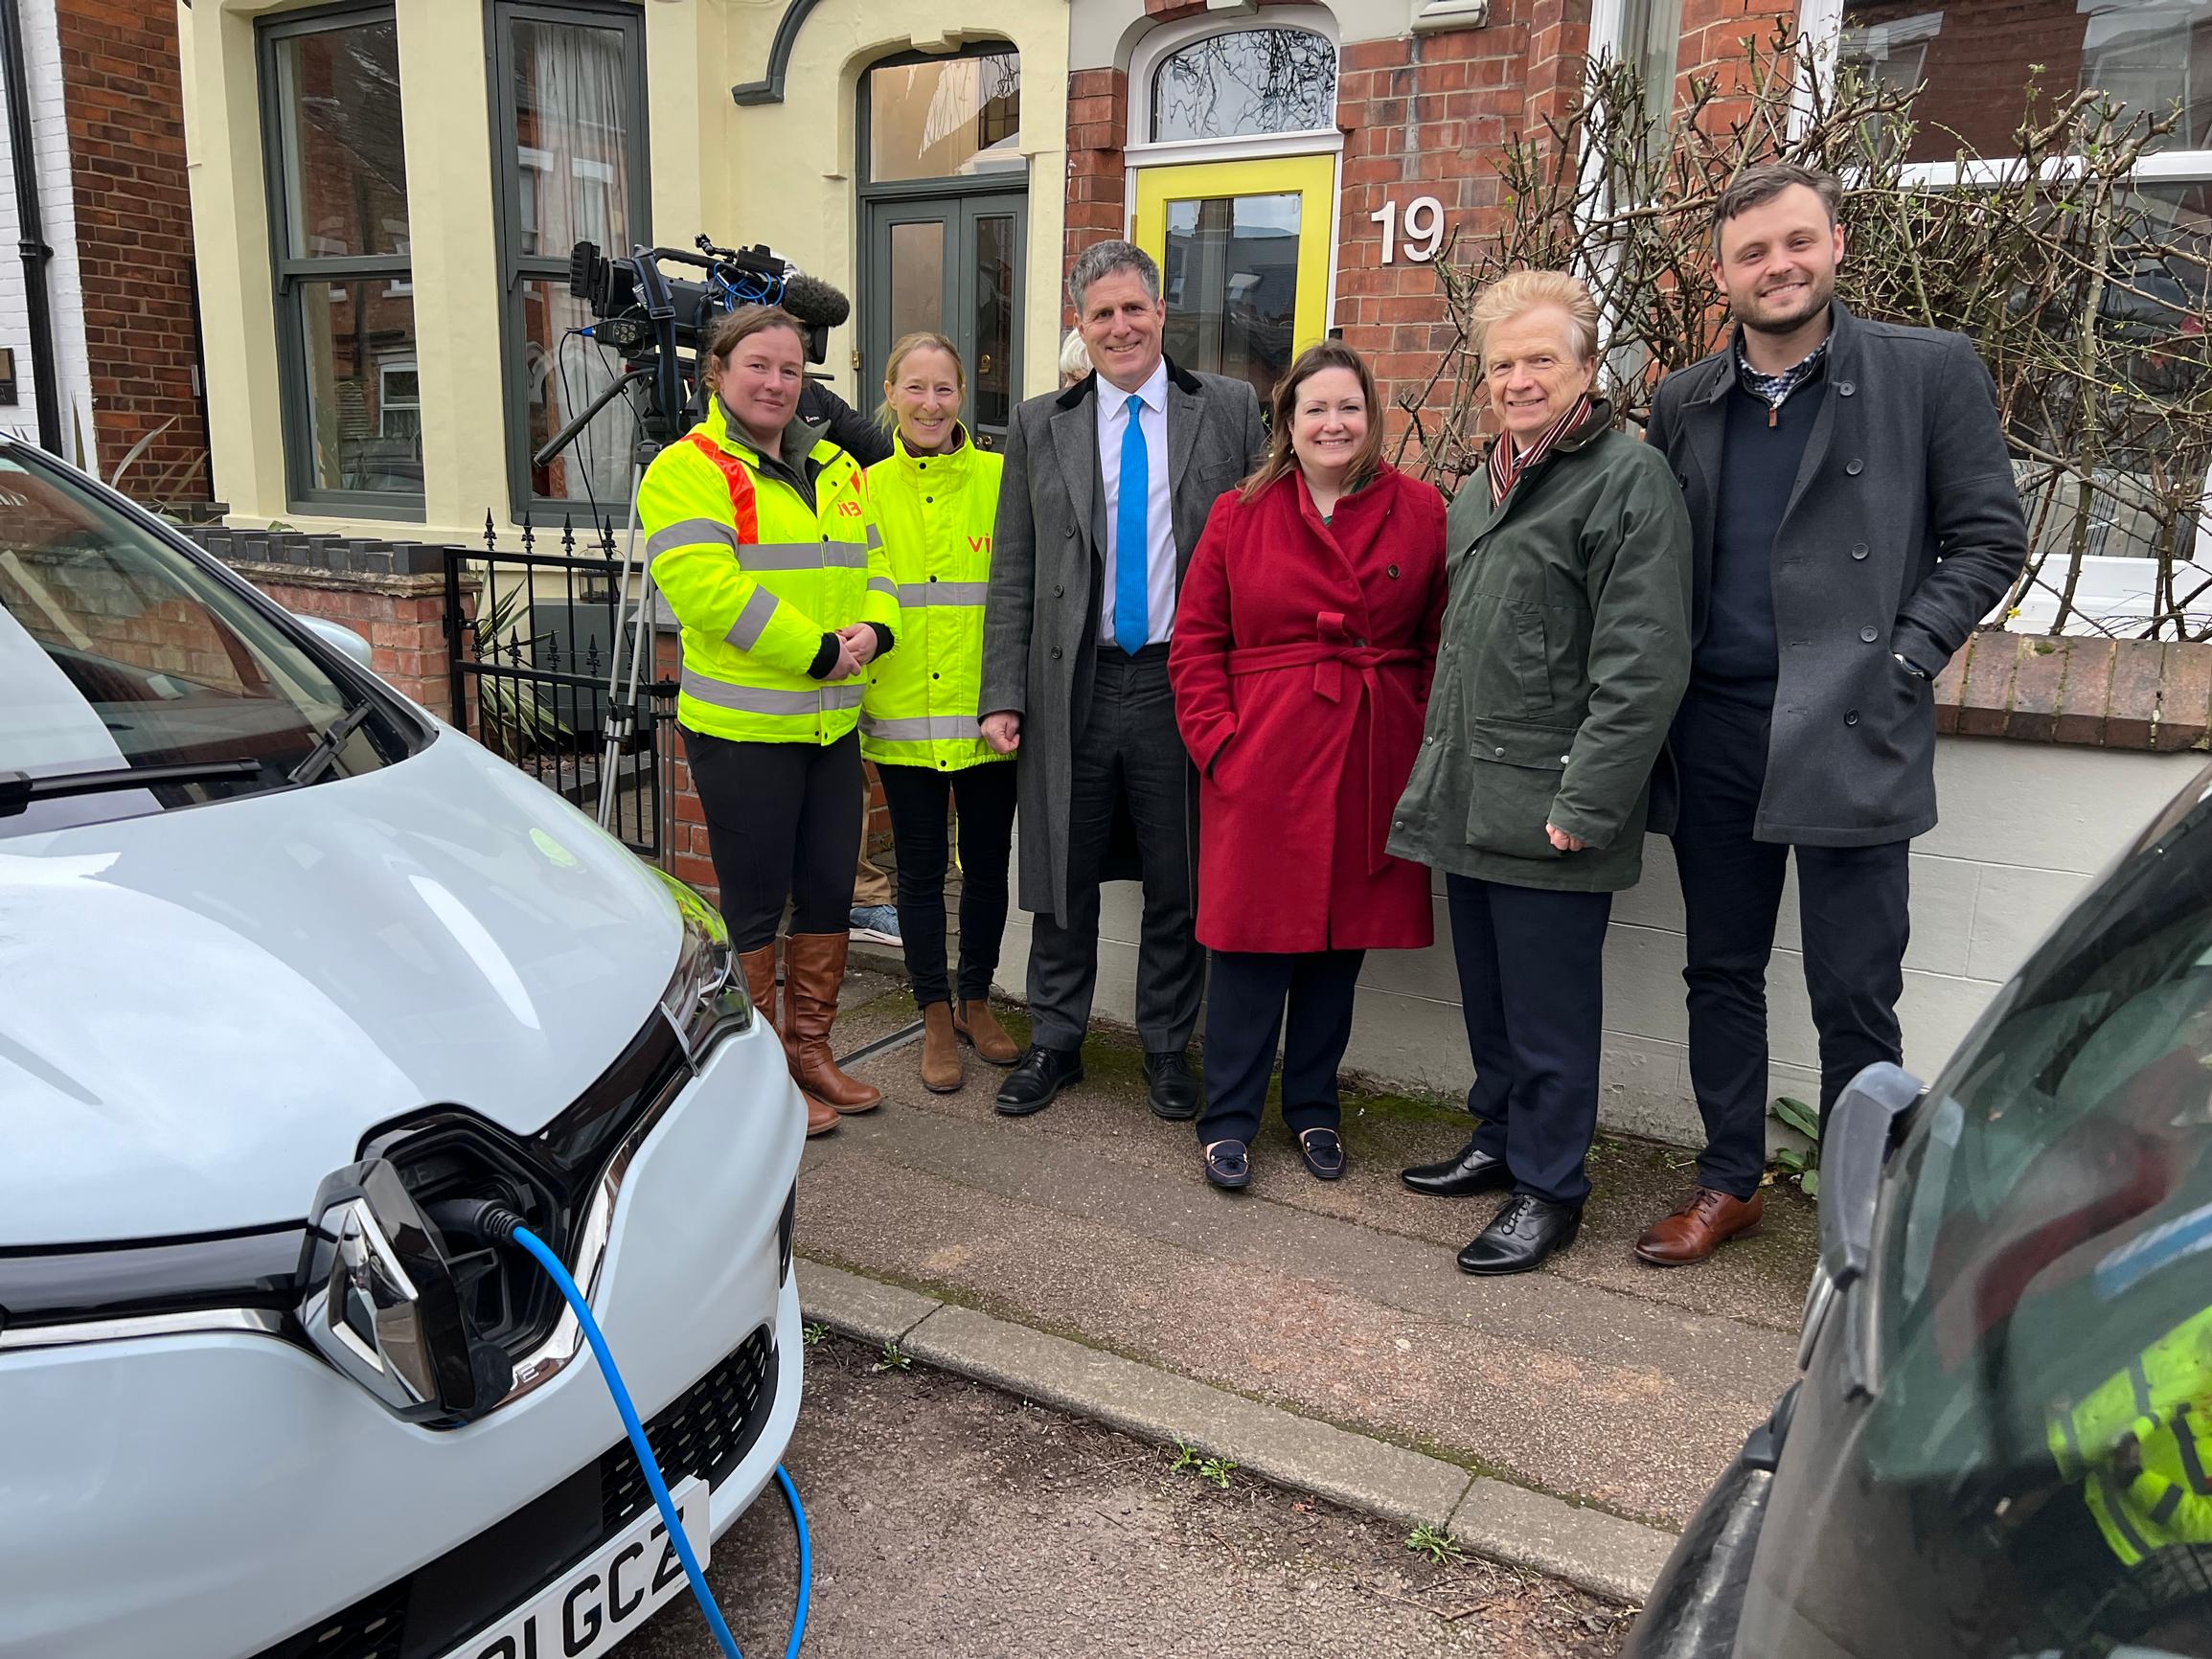 Transport minister for technology and decarbonisation Anthony Browne with Ben Bradley MP, leader of Nottinghamshire County Council, Rushcliffe MP Ruth Edwards and Cllr Neil Clarke MBE, cabinet member for transport and environment at Nottinghamshire County Council